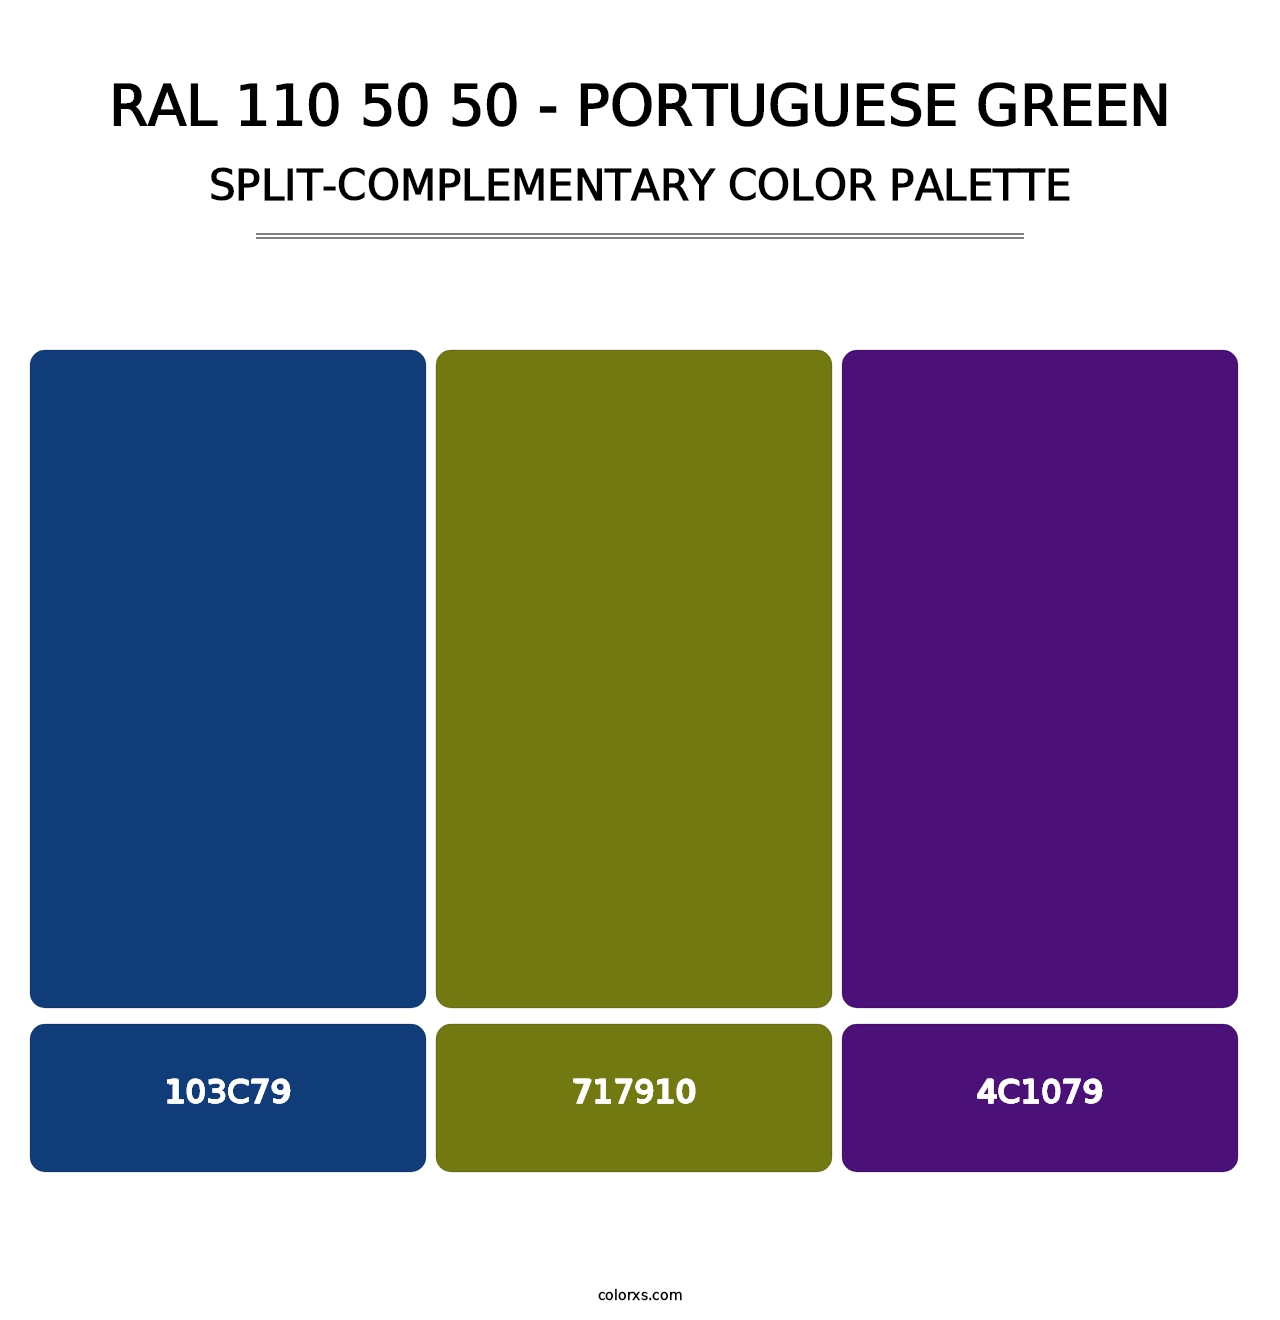 RAL 110 50 50 - Portuguese Green - Split-Complementary Color Palette